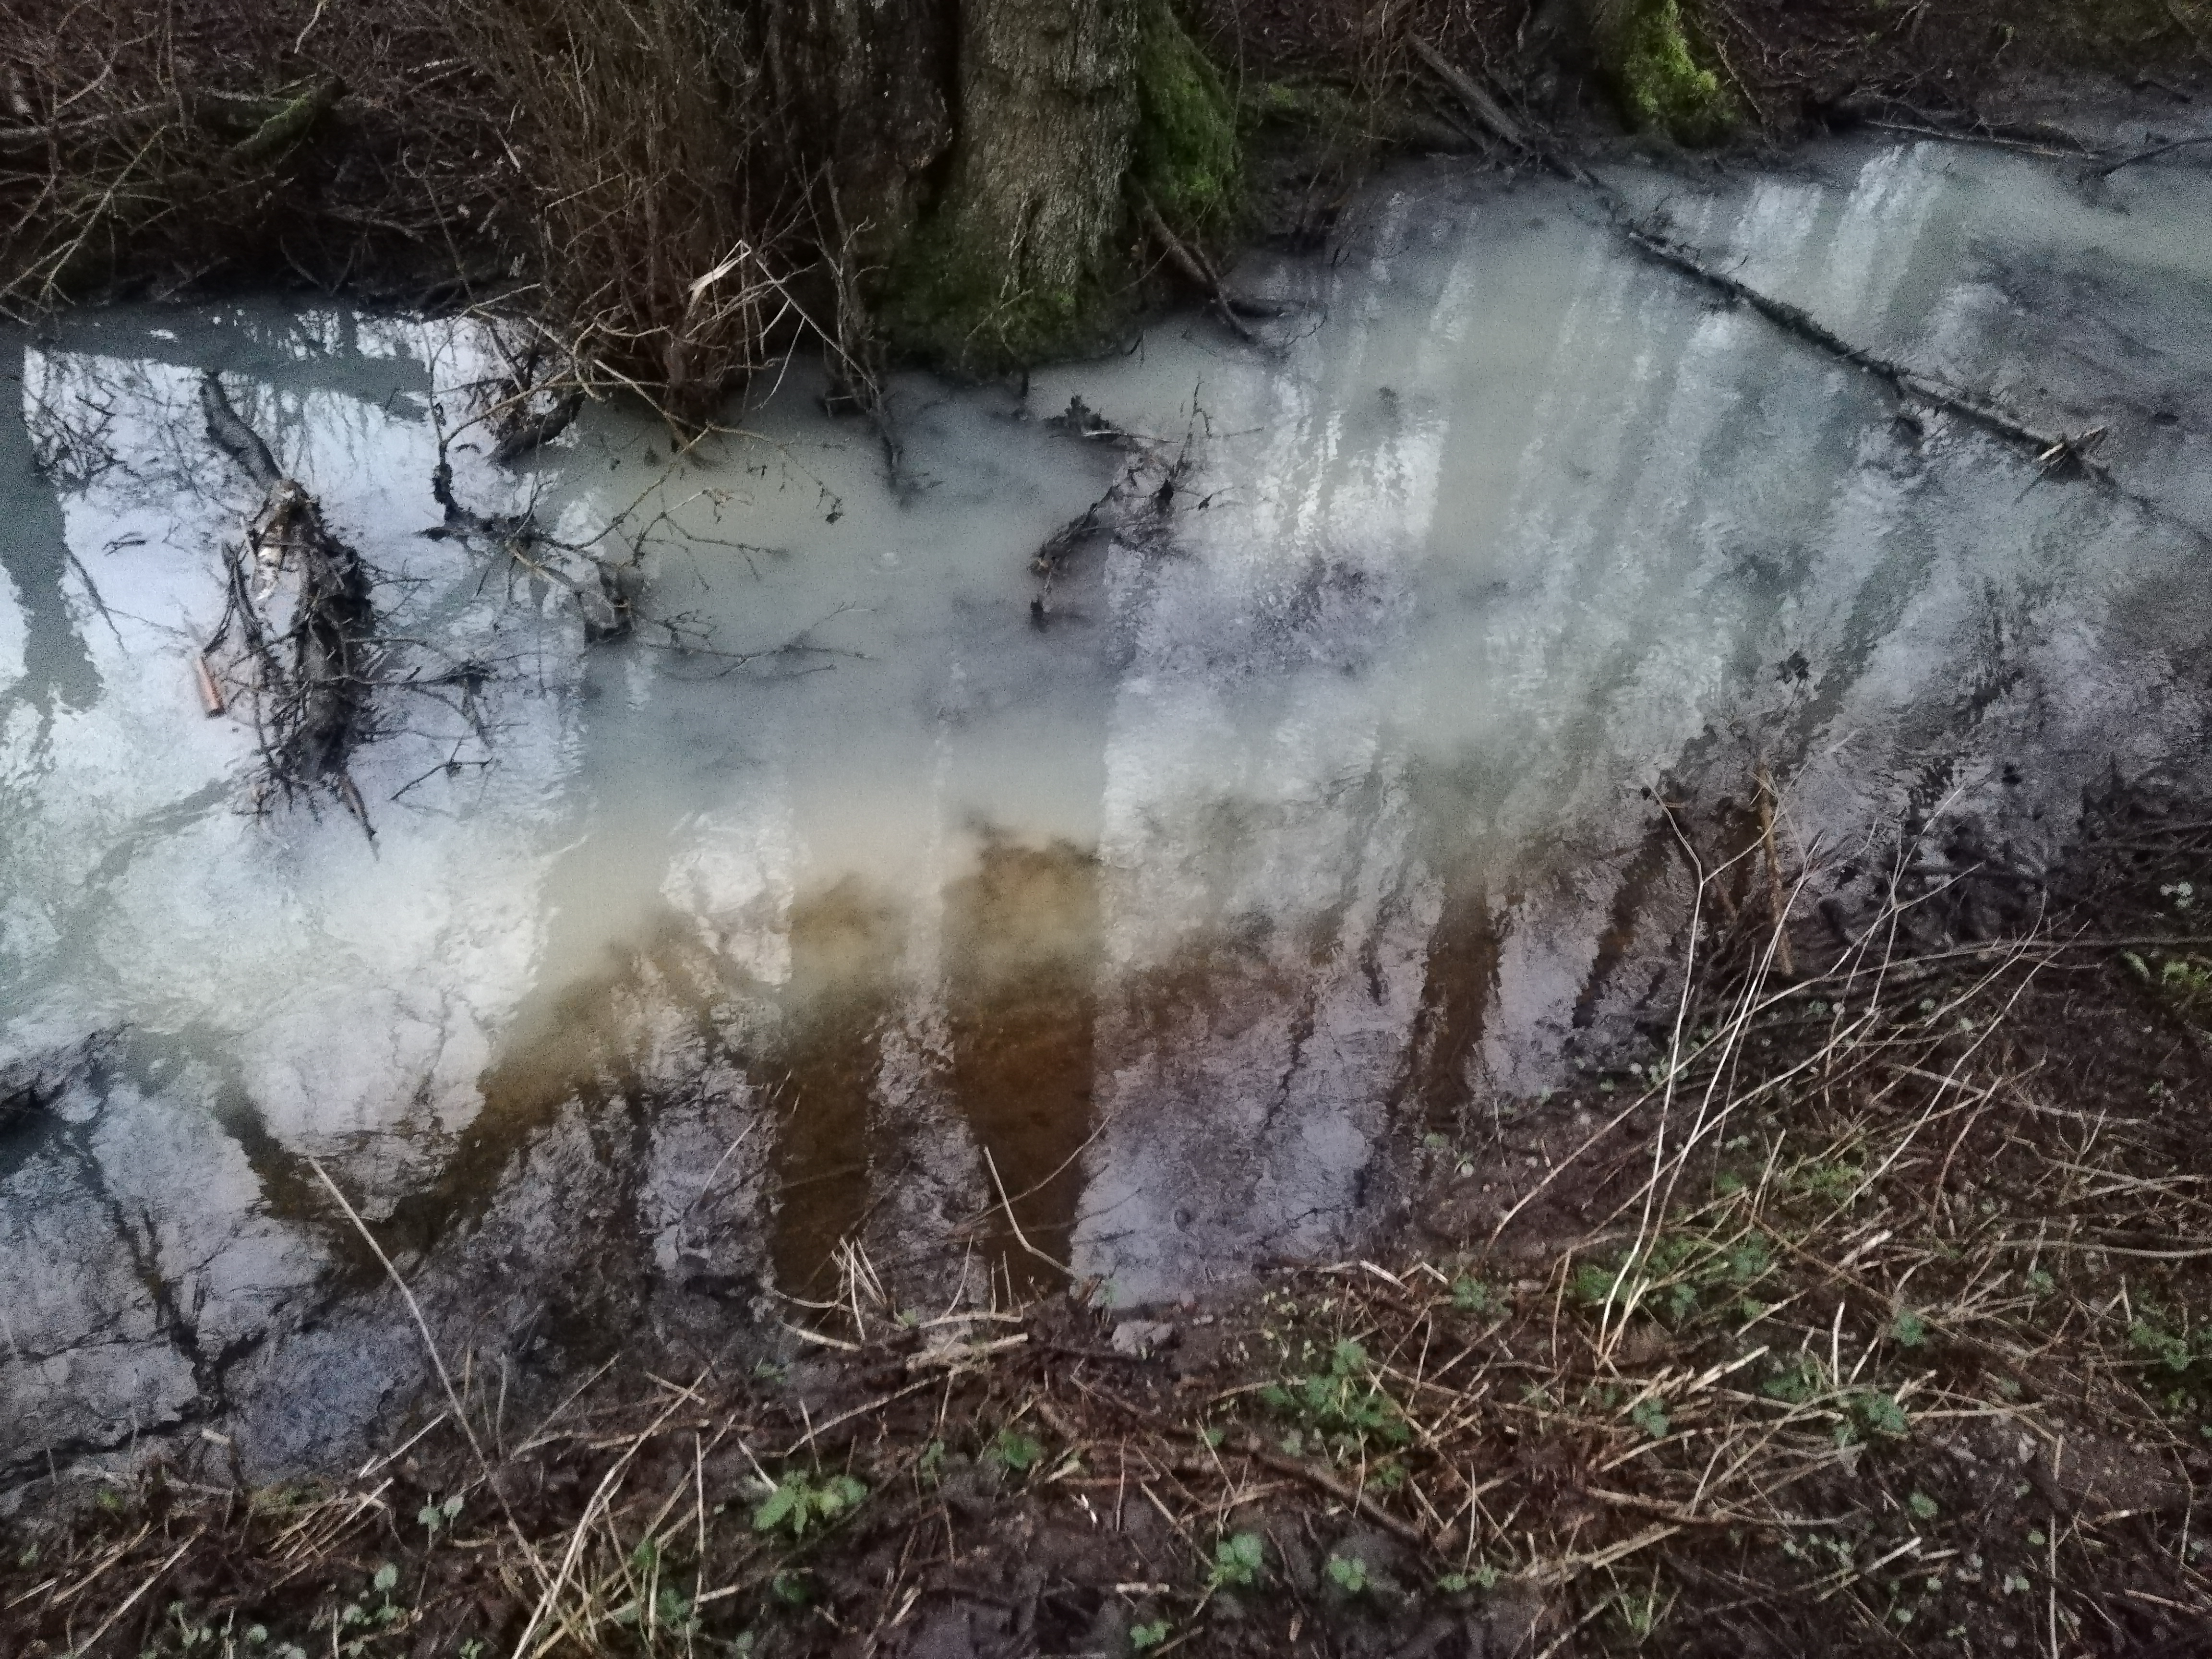 Water mixing in the stream. Photo.